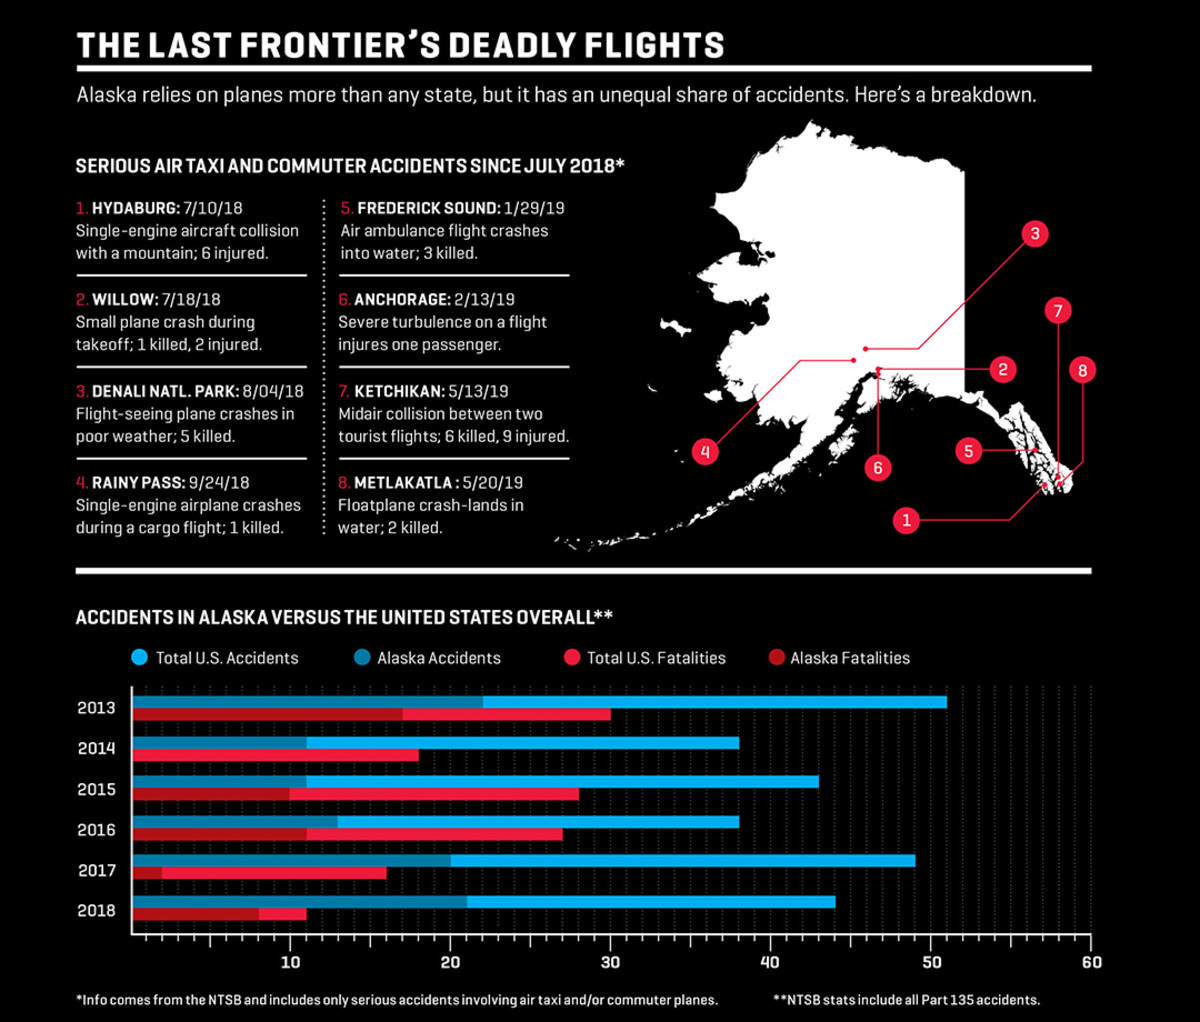 Alaska has half as many commuter and air traffic accidents as the Lower 48 per year despite having five times less land area and a population smaller than Delaware